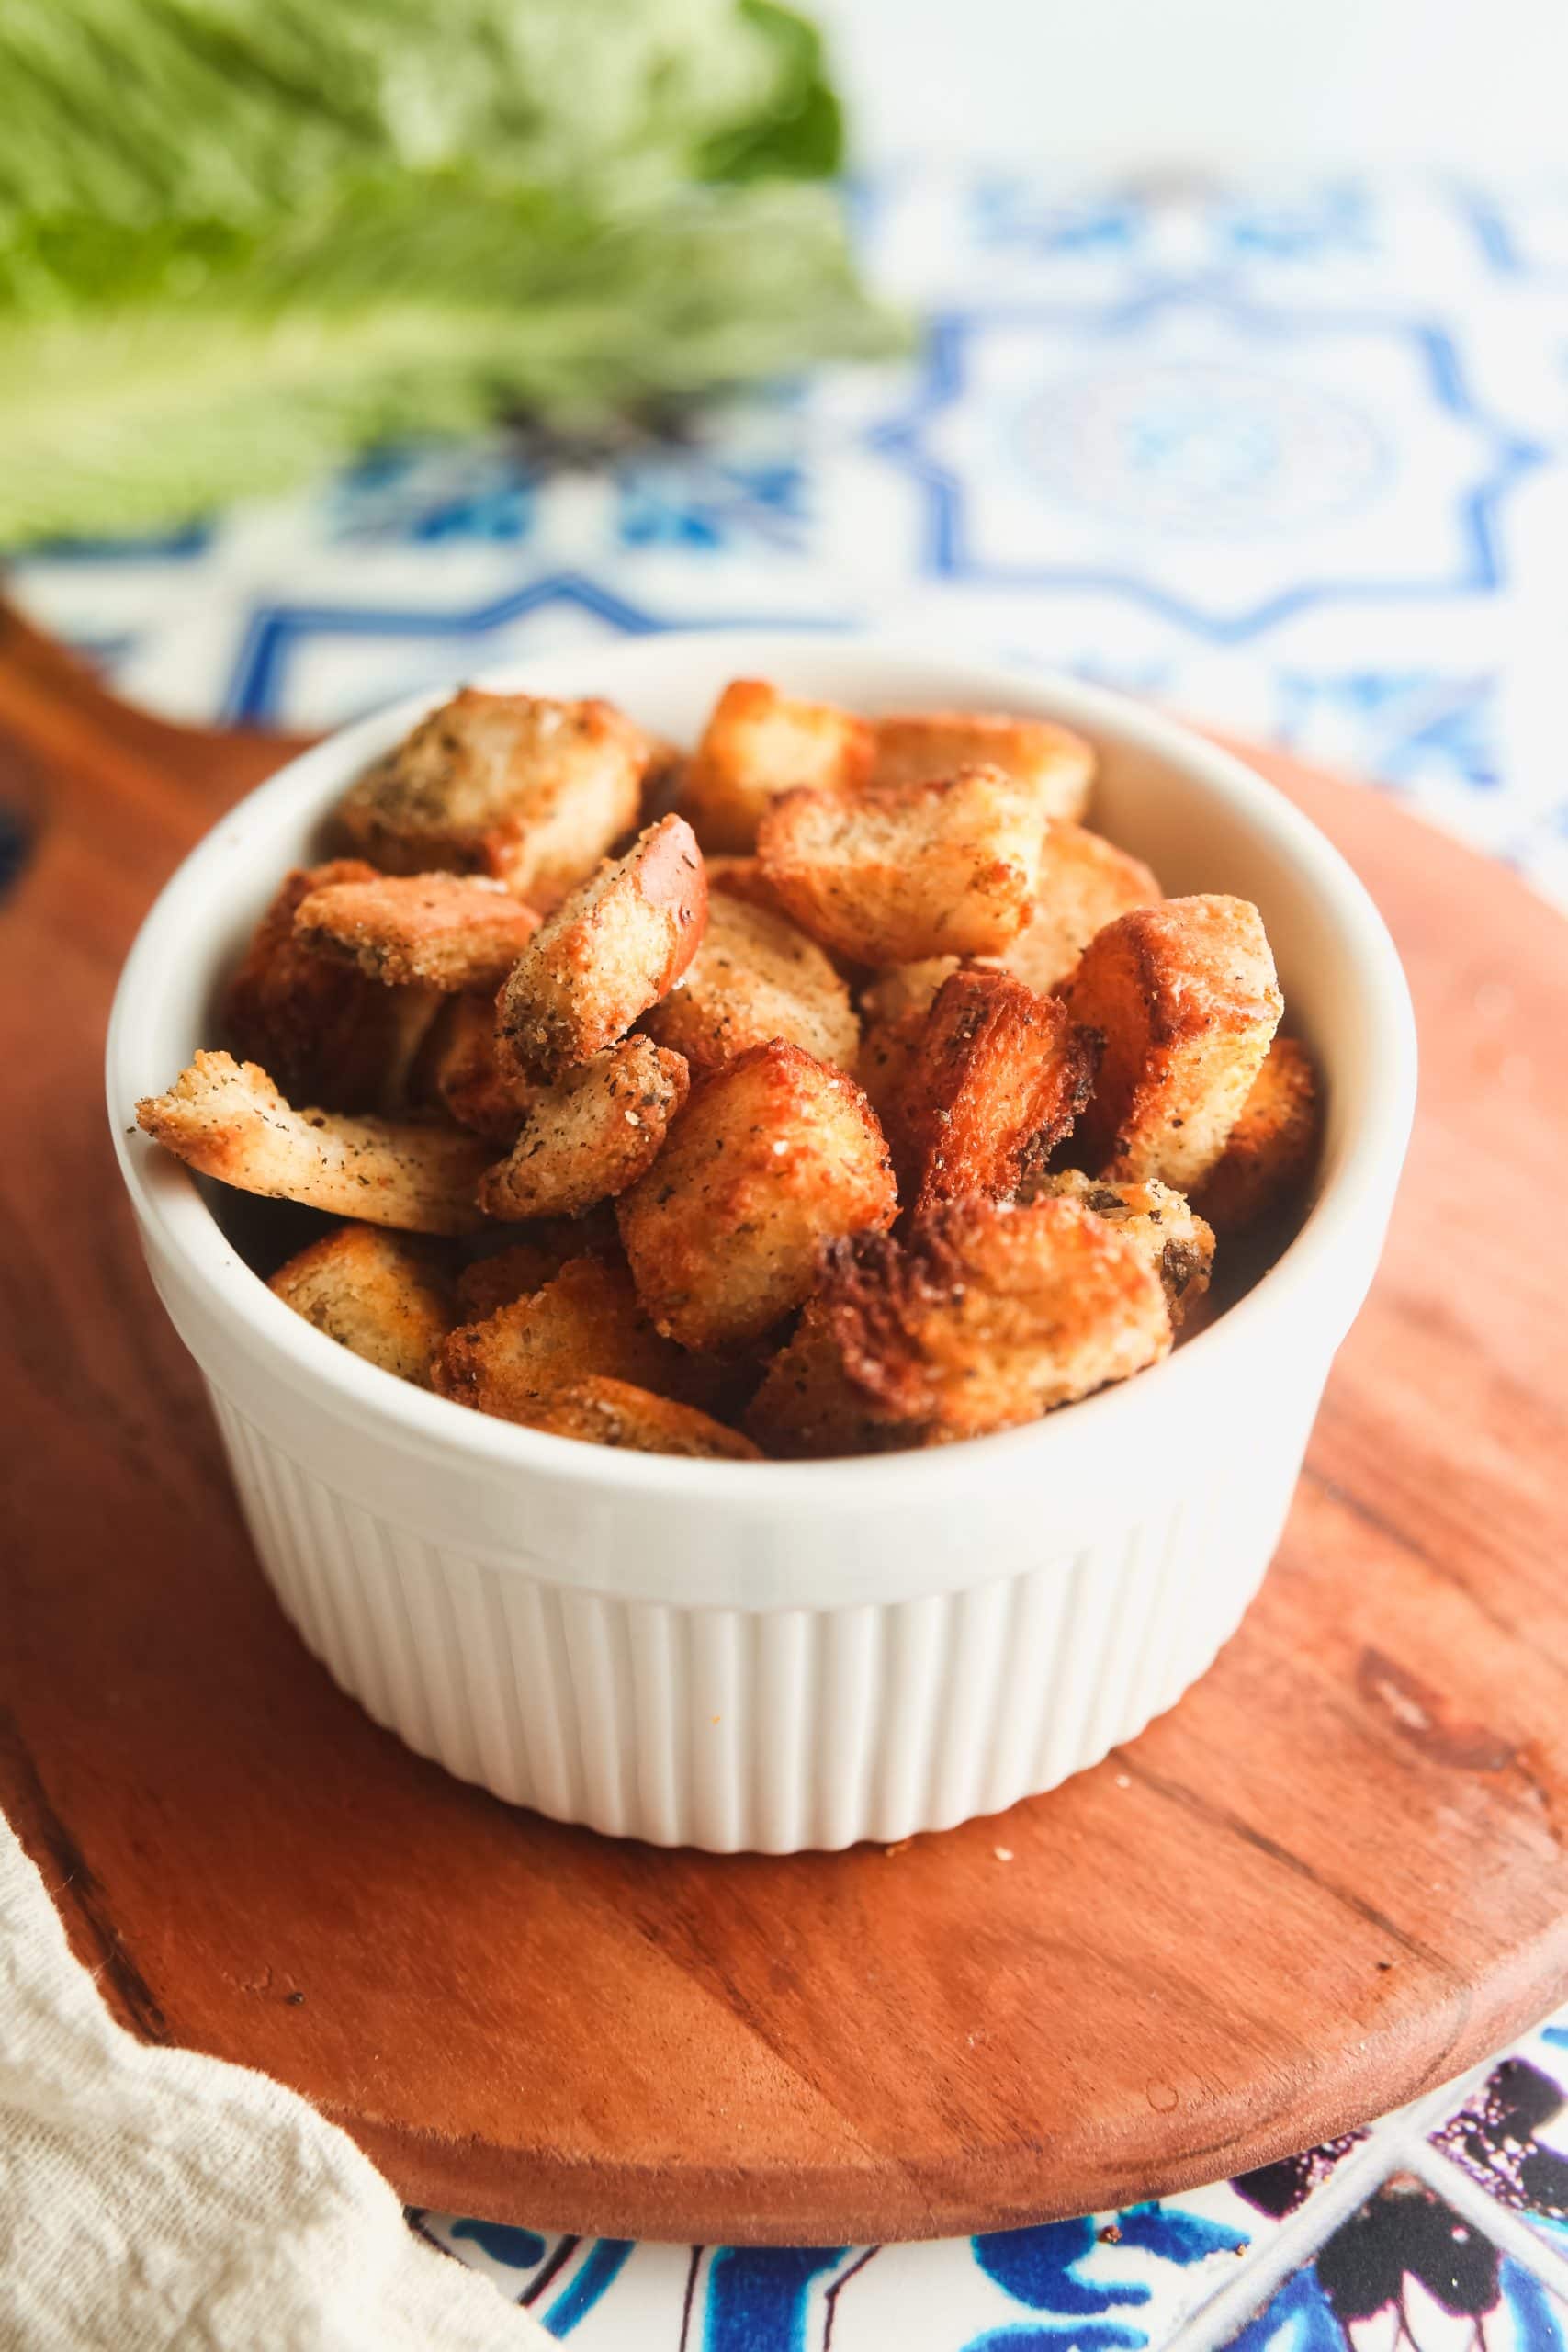 https://www.healthy-delicious.com/wp-content/uploads/2023/01/air-fryer-croutons-7-scaled.jpg